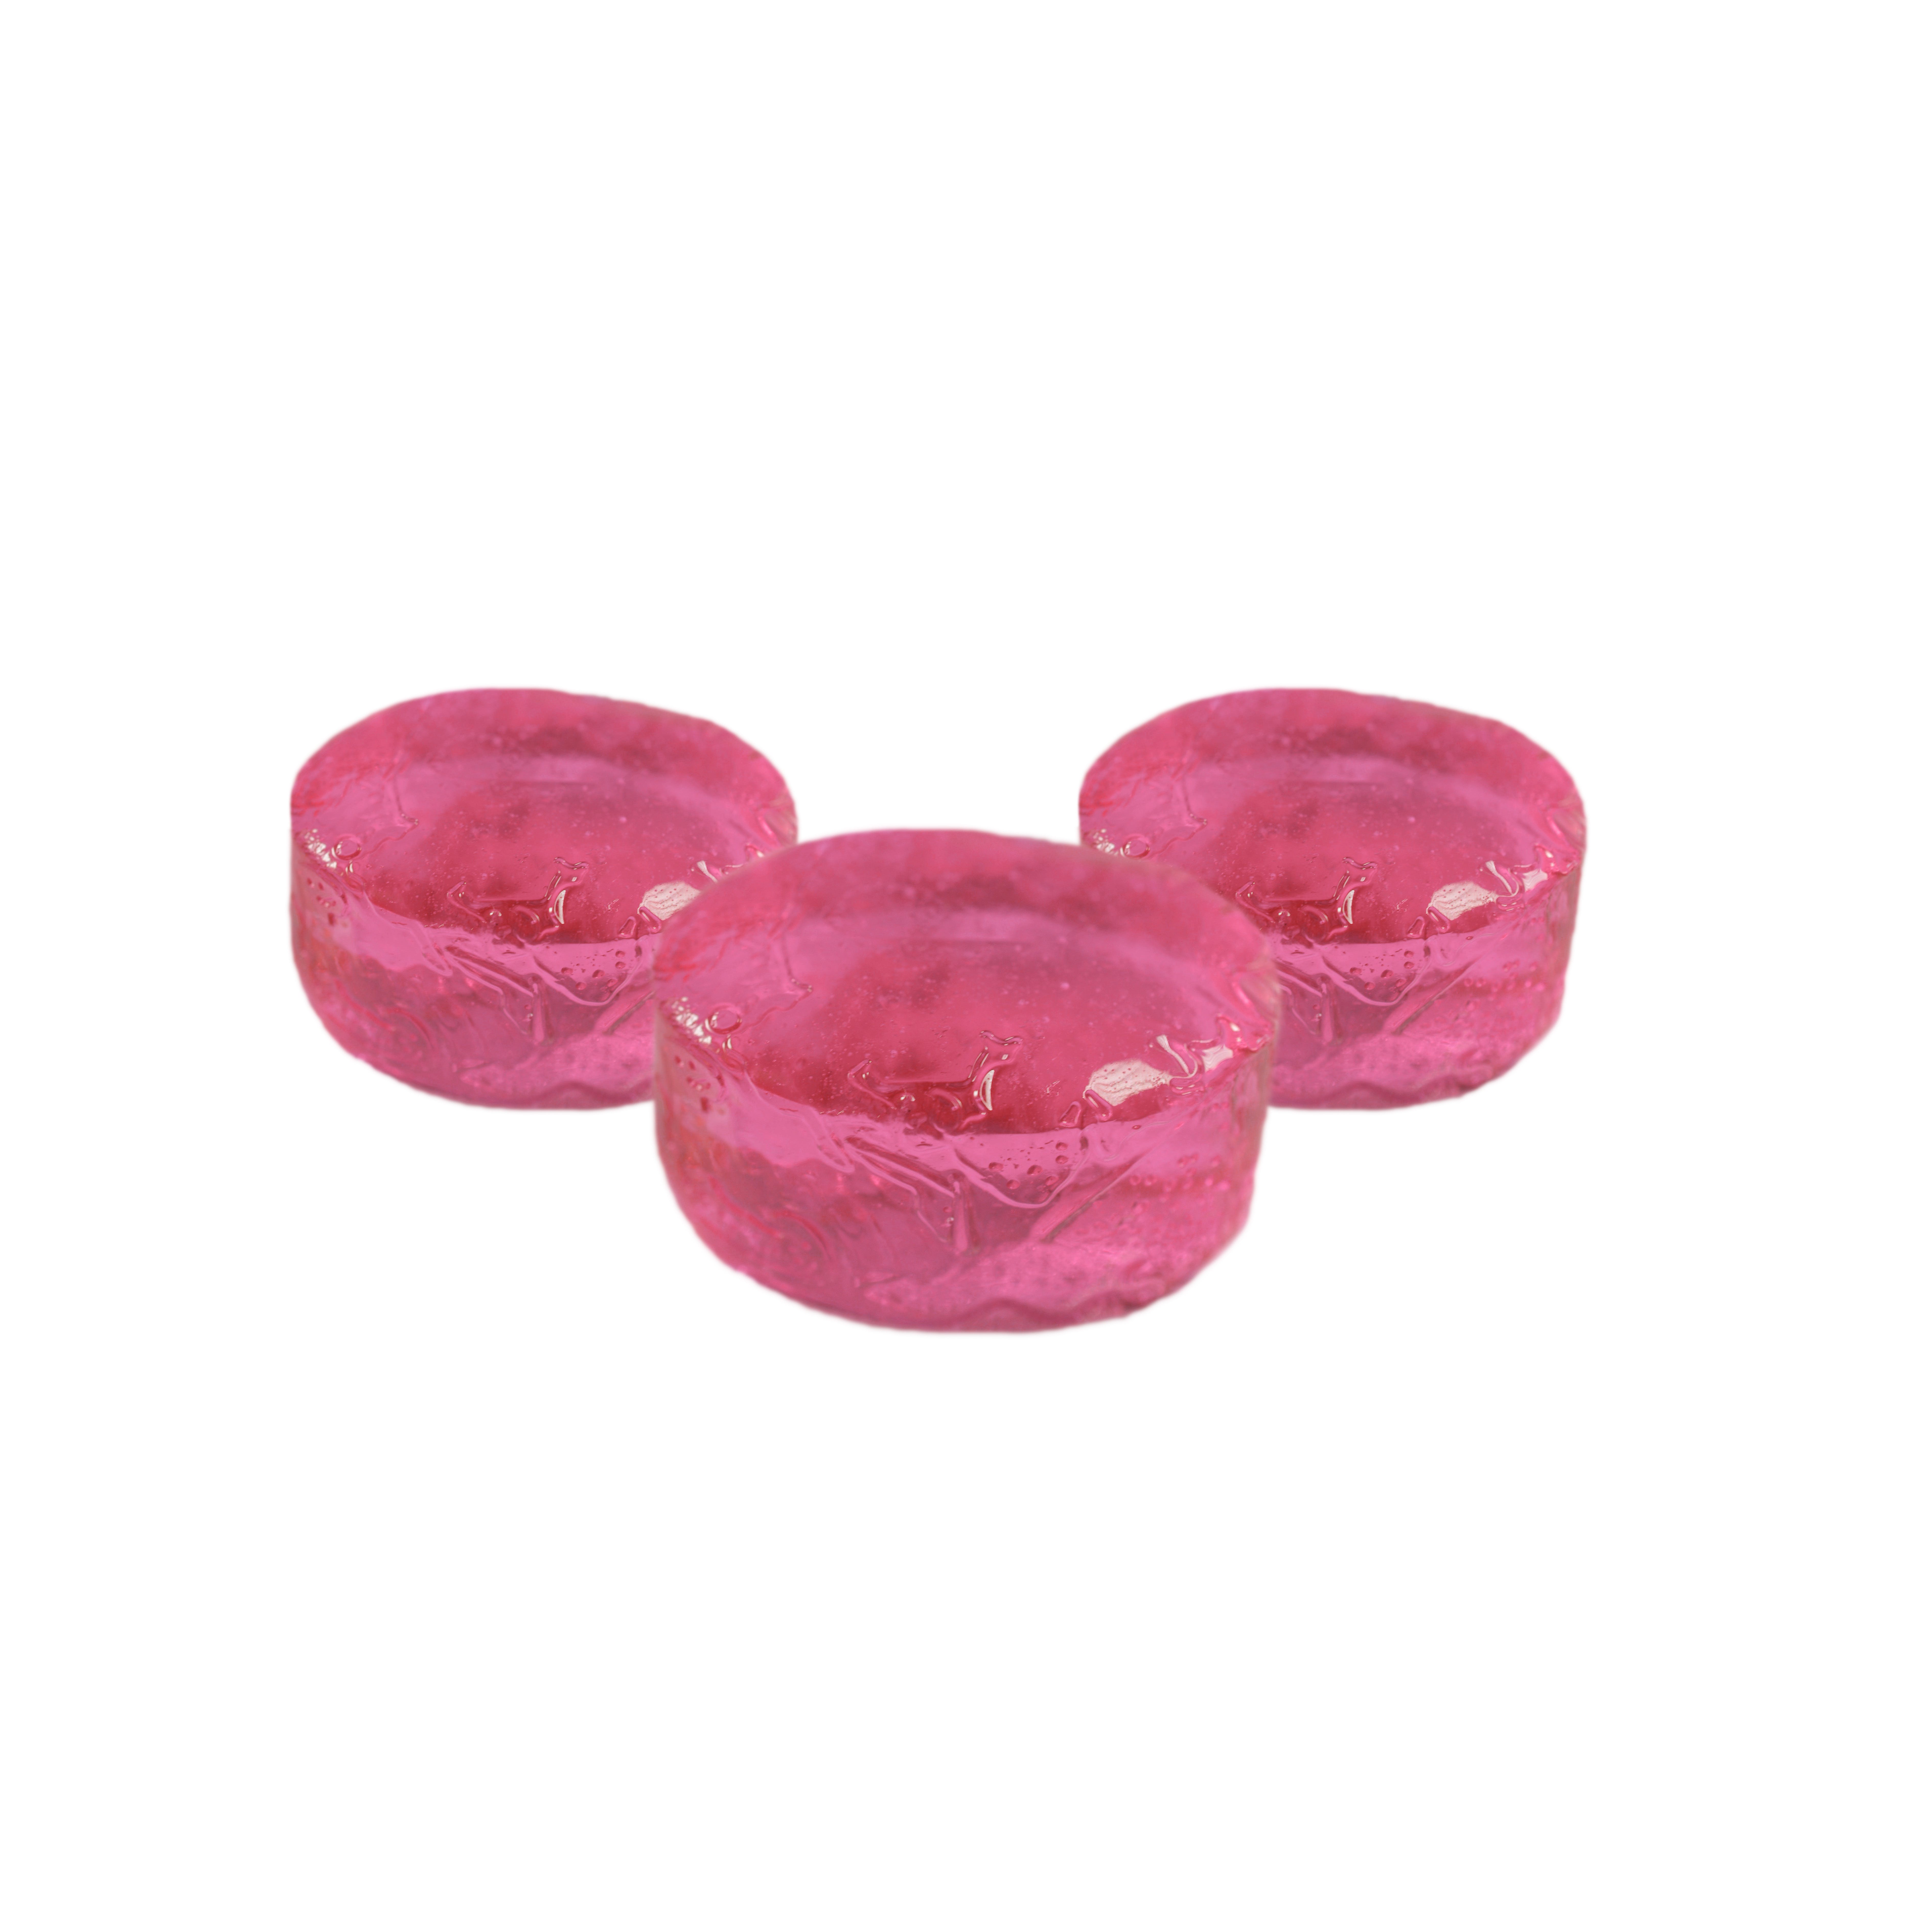 Hard Candy - Watermelon 4 Pack